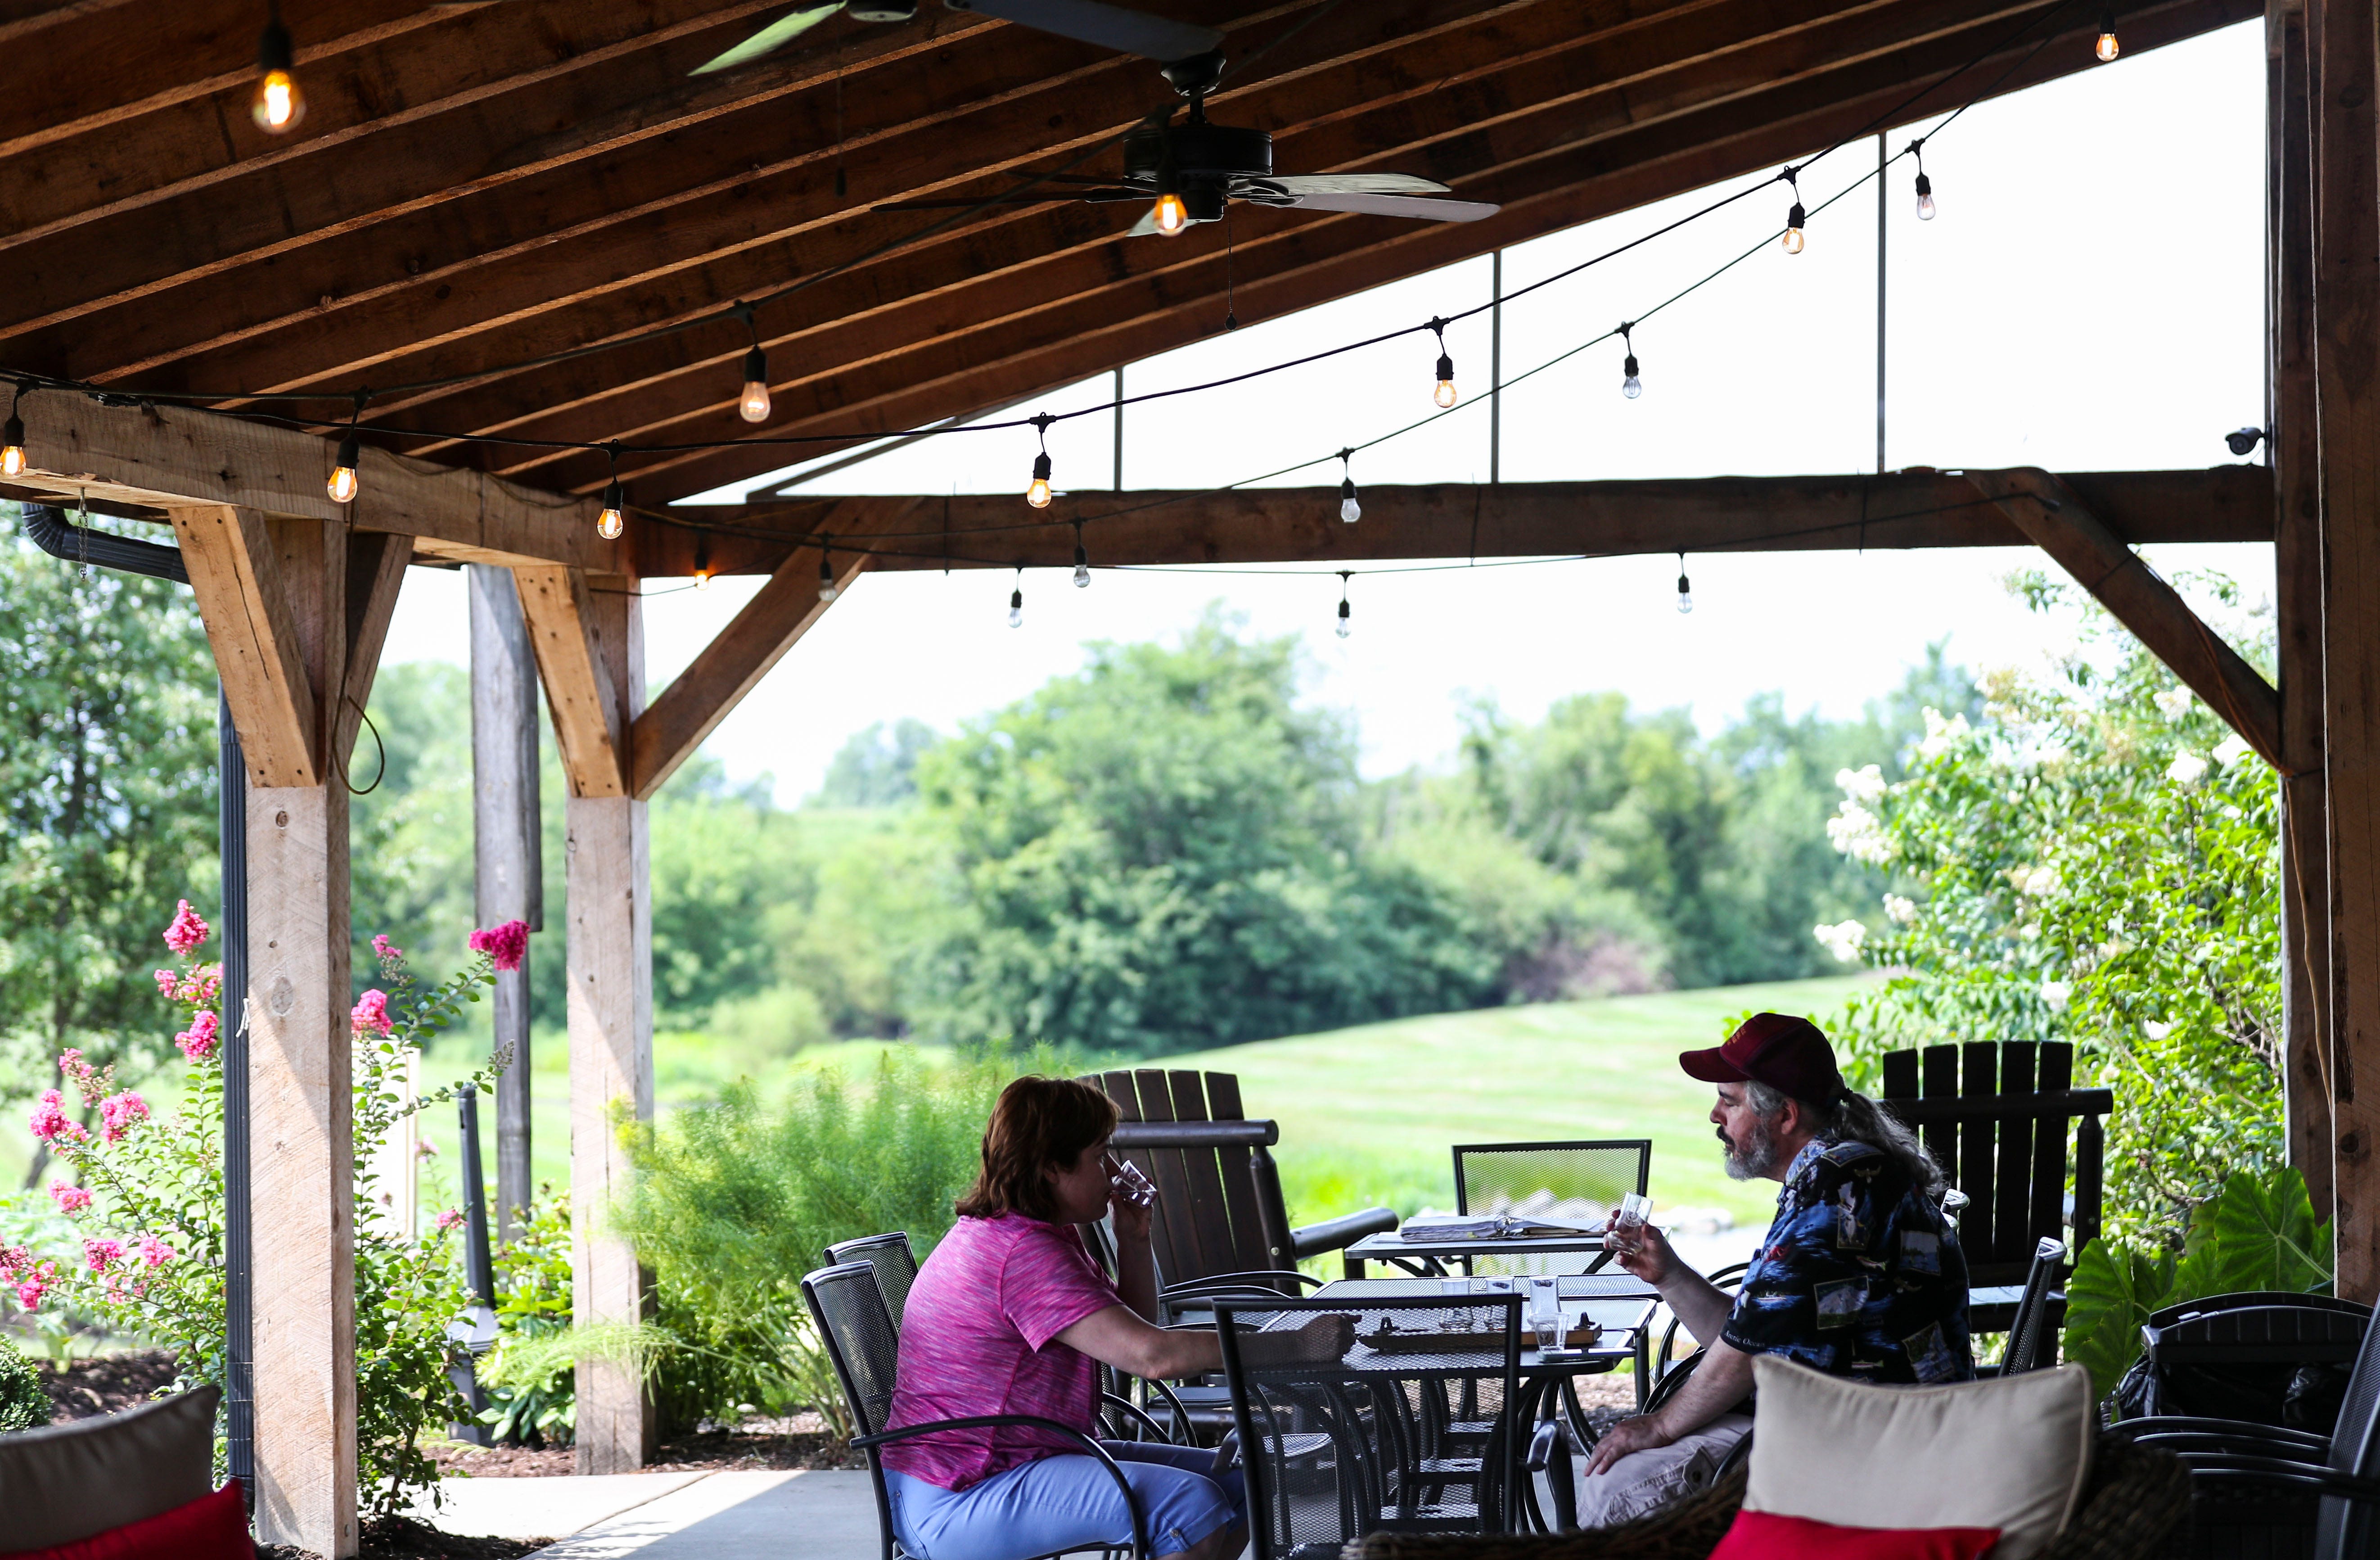 A large porch offers visitors a place to taste a whiskey flight during the warmer months of the year at the Lebanon, Ky. distillery. Views of the rolling Kentucky countryside can be seen while tasting the bourbon, whiskey or gin that the small distillery produces.